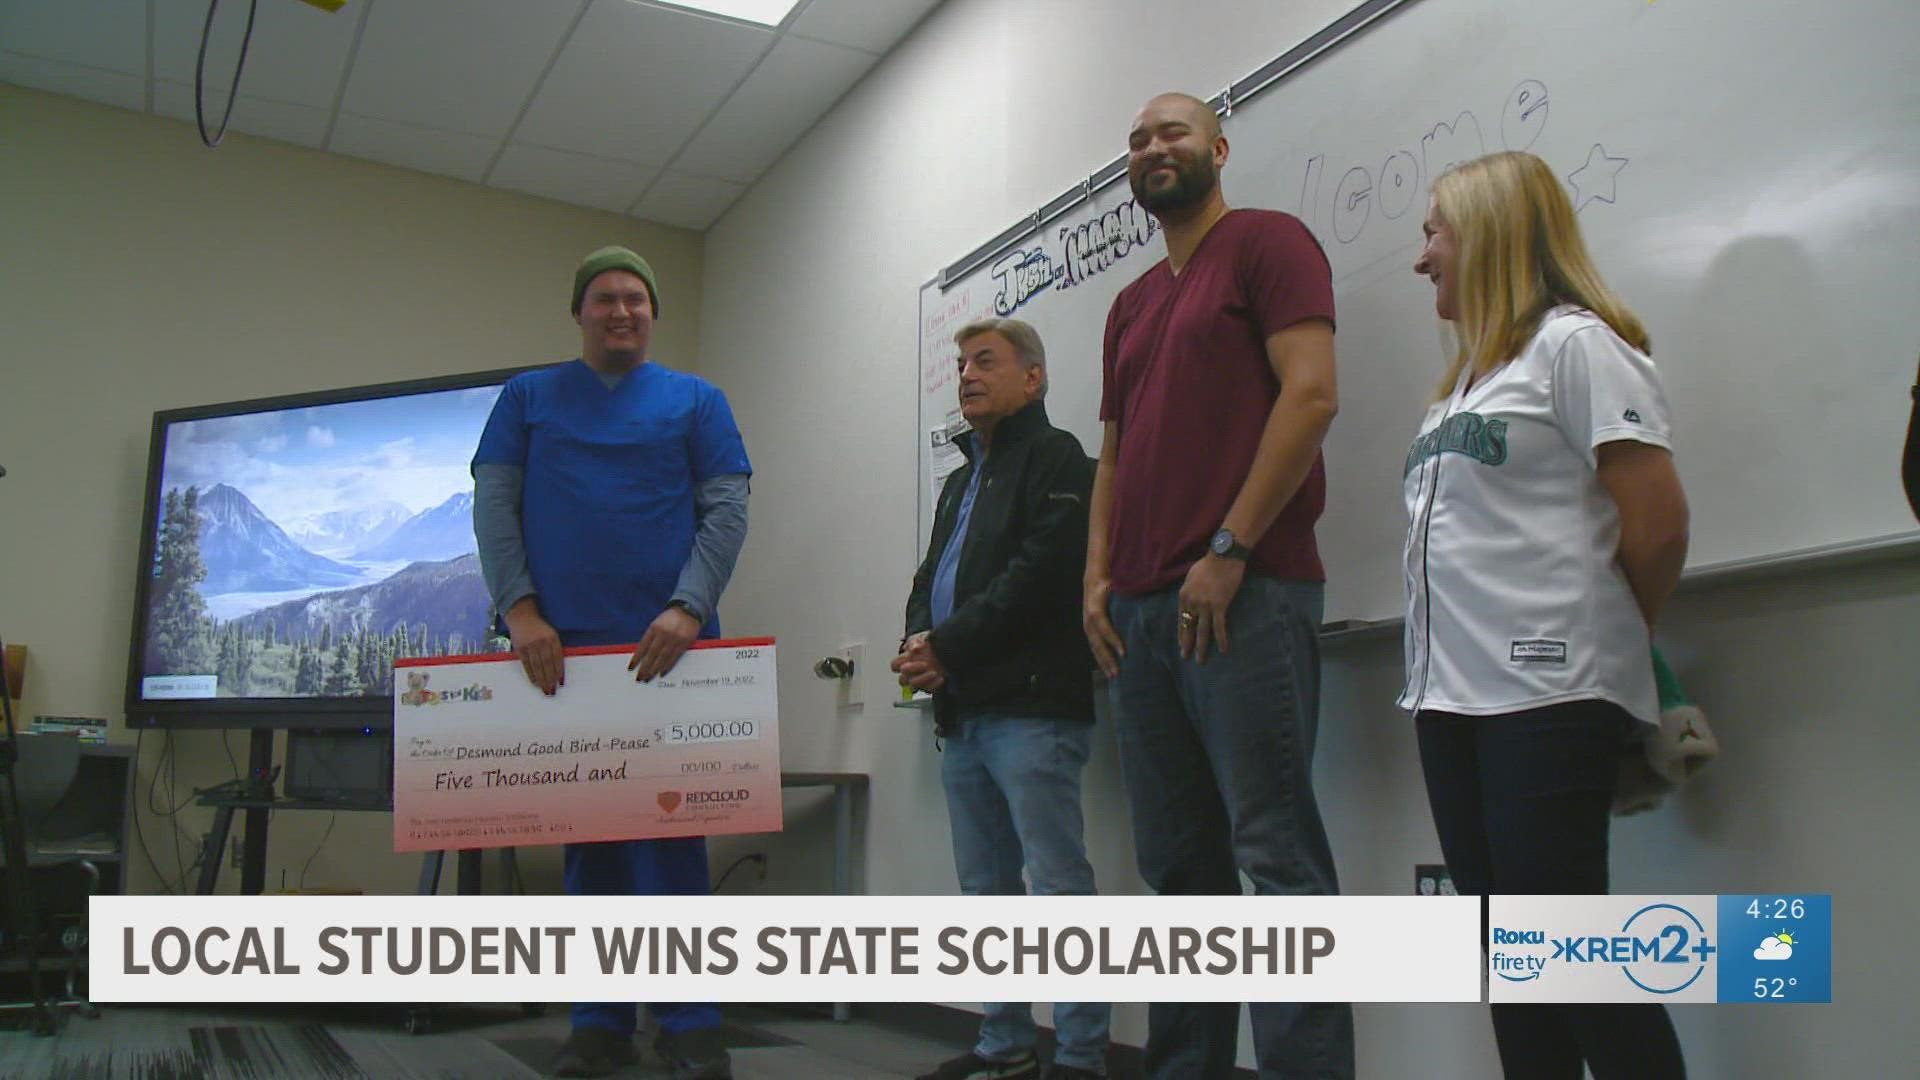 The Dave Henderson Scholarship, named after the legendary Mariners center-fielder, was awarded to one local student looking to make the big step to college.